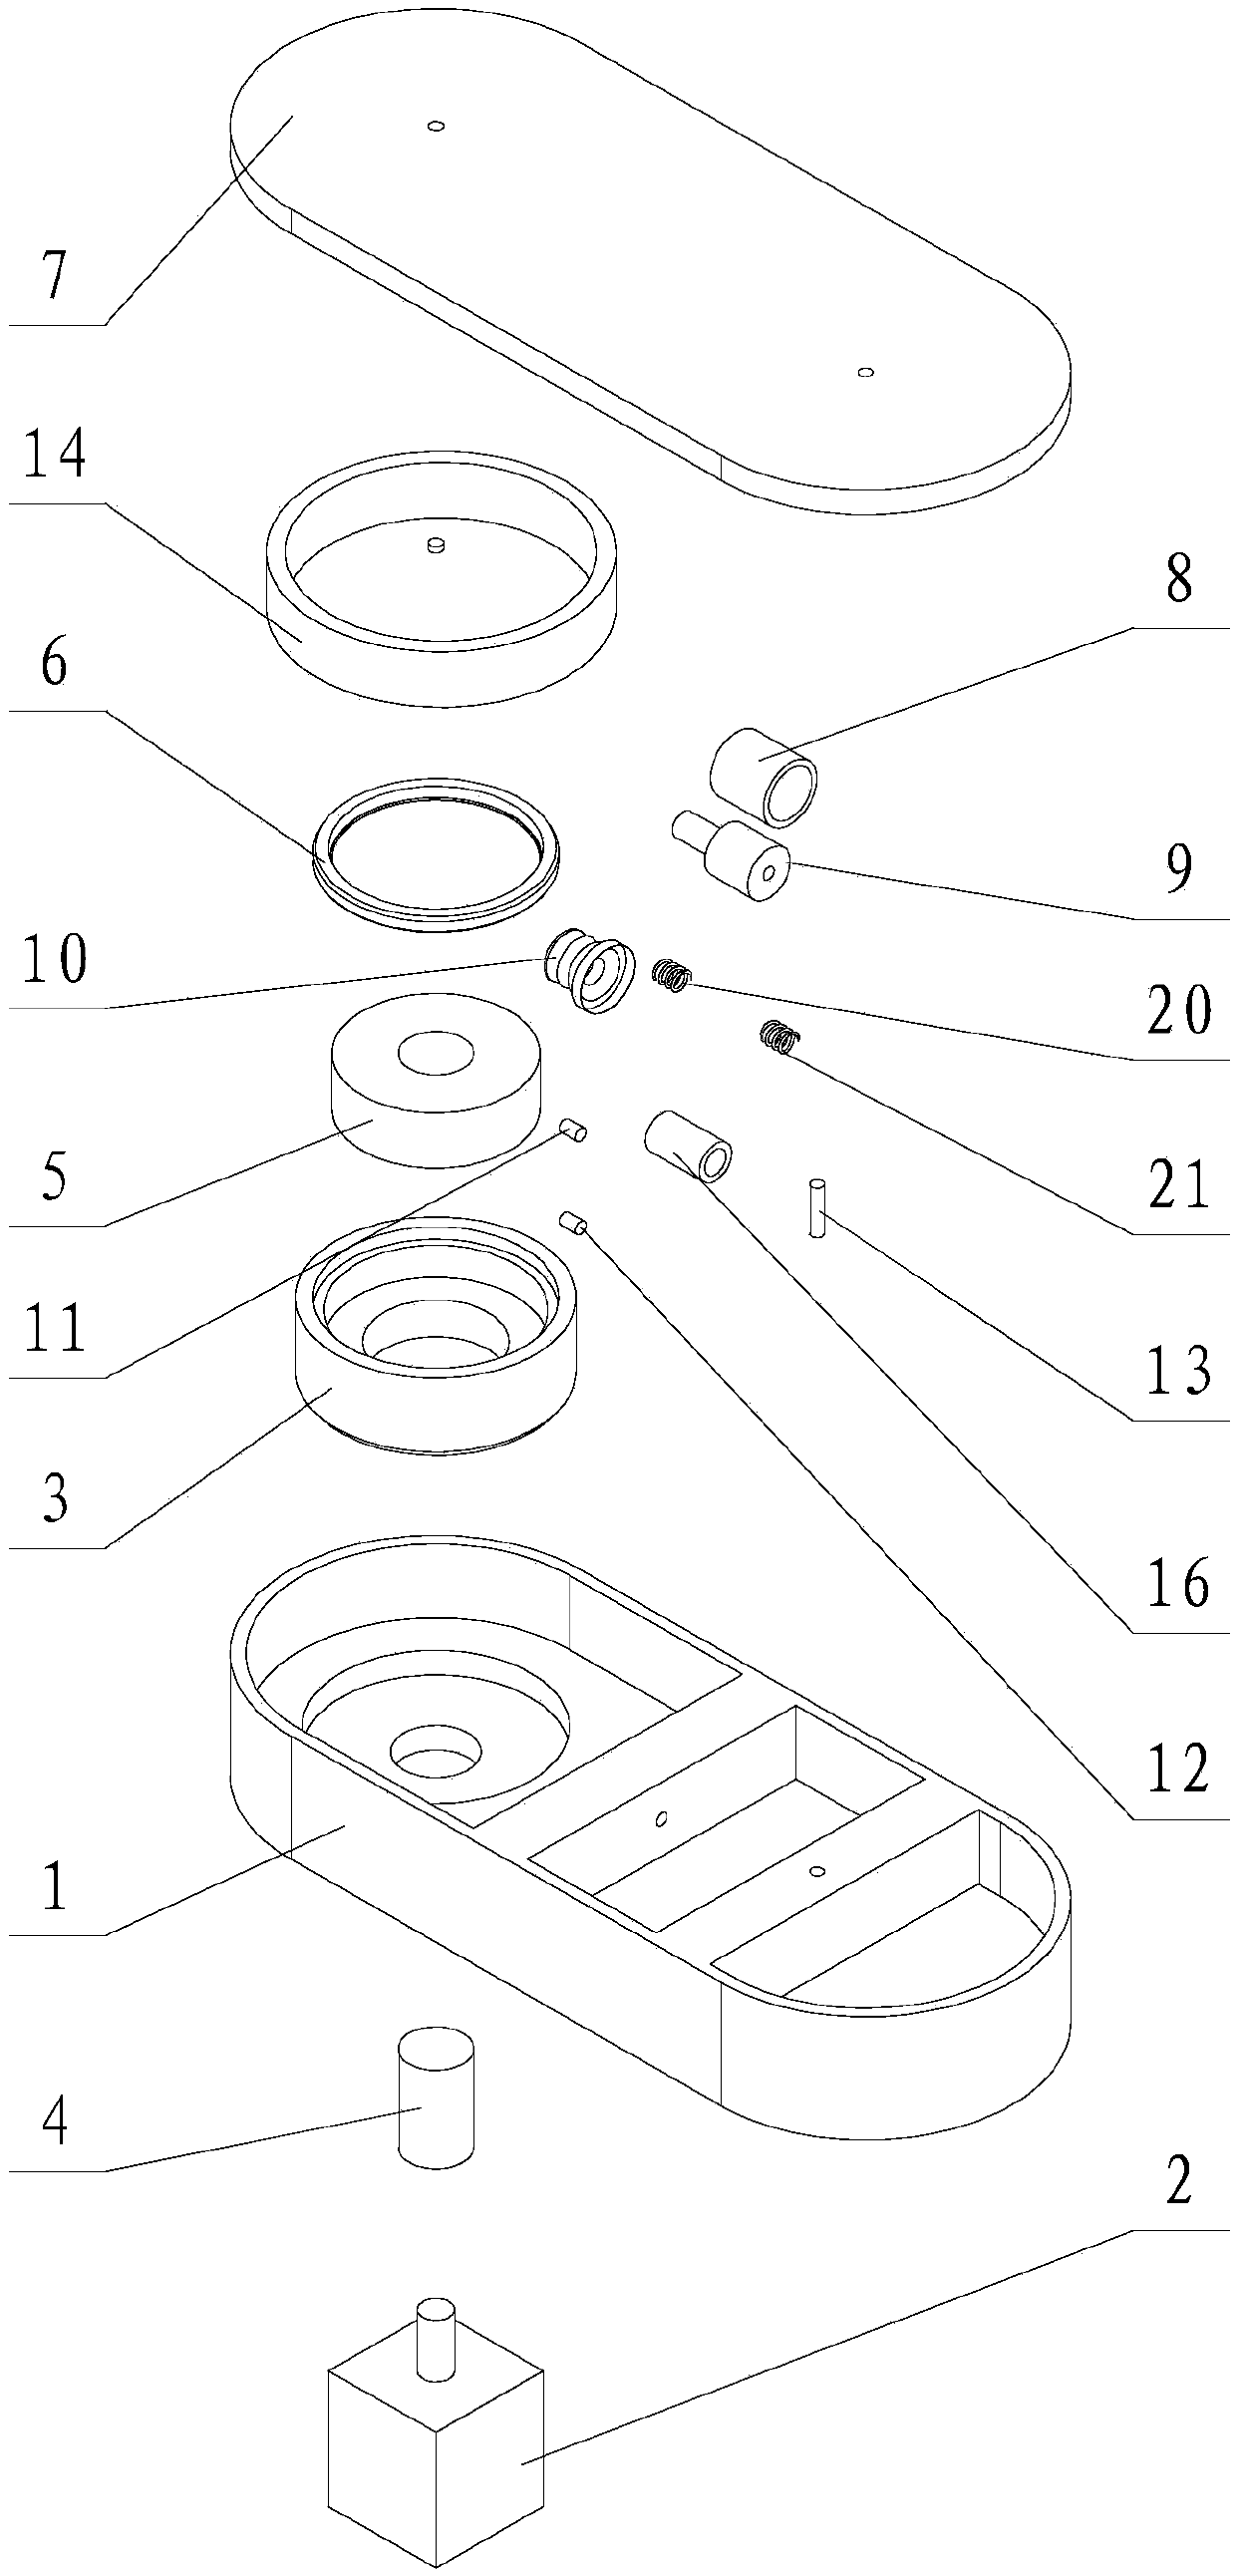 Actuating cam type lubricating self-cleaning mechanism